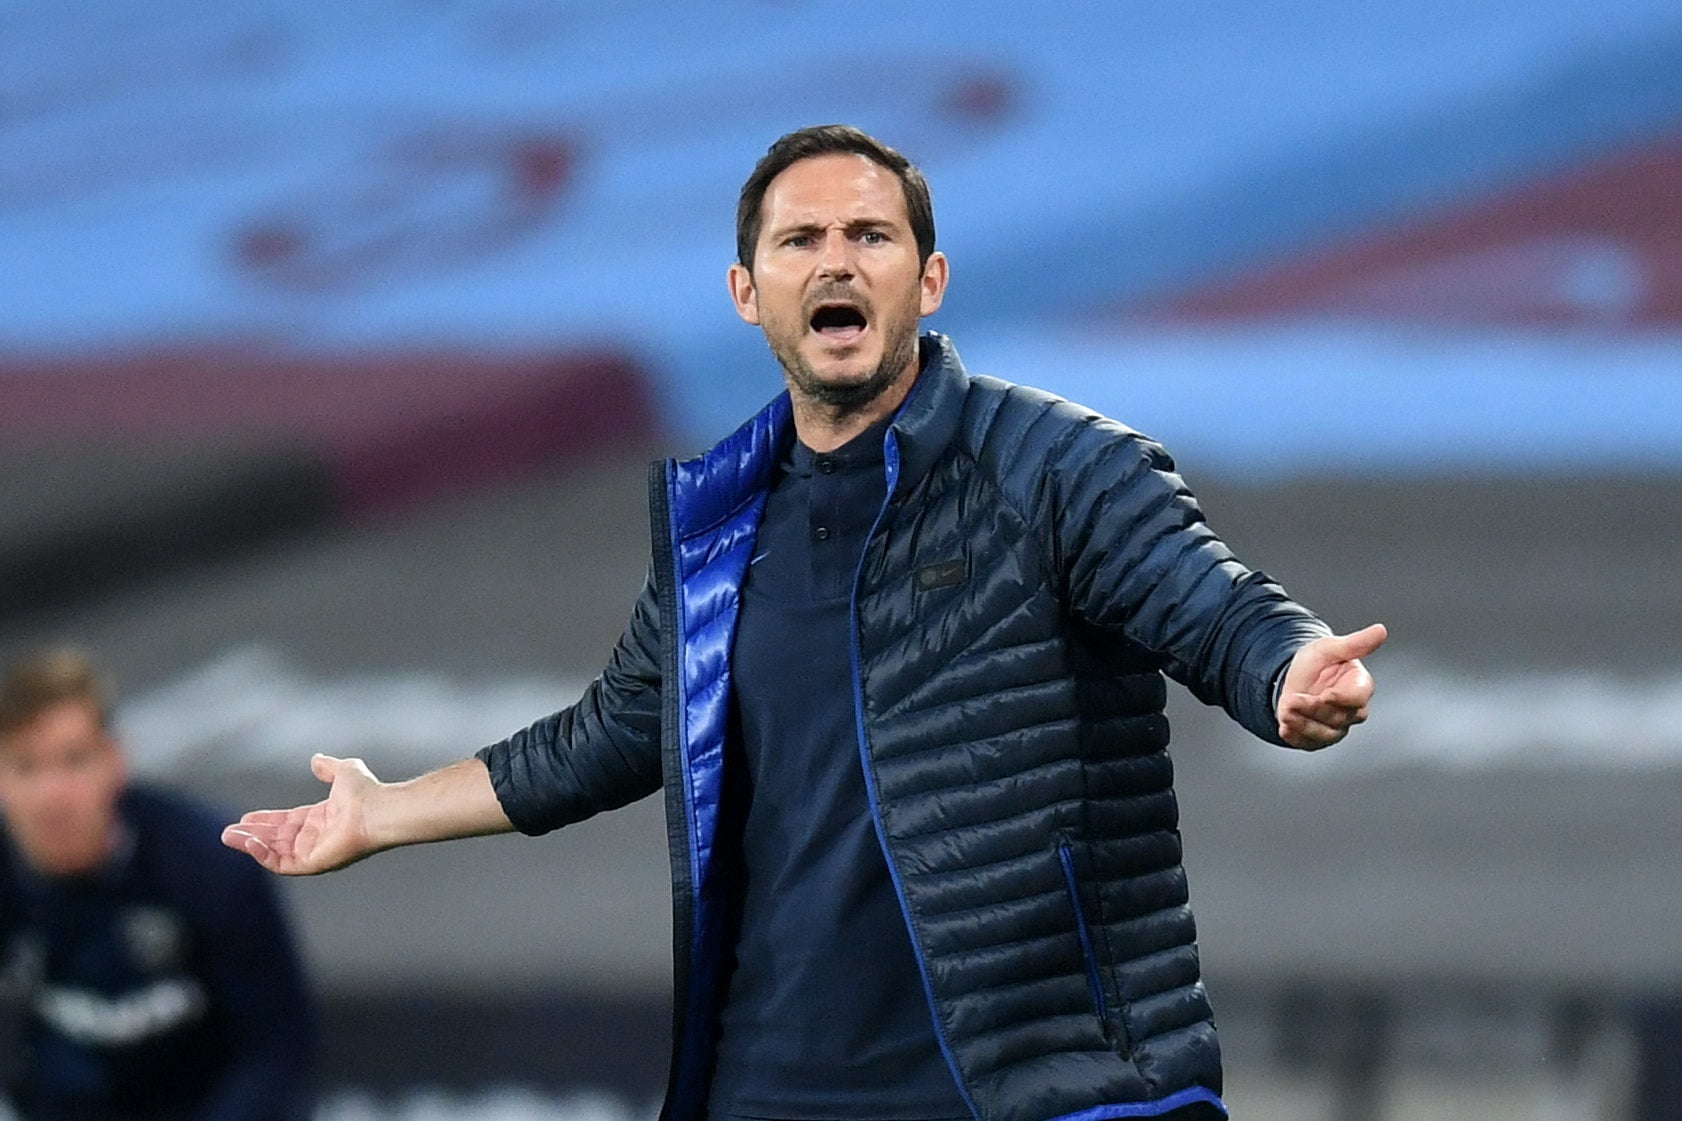 EPL: Lampard in talks to join Chelsea's rivals